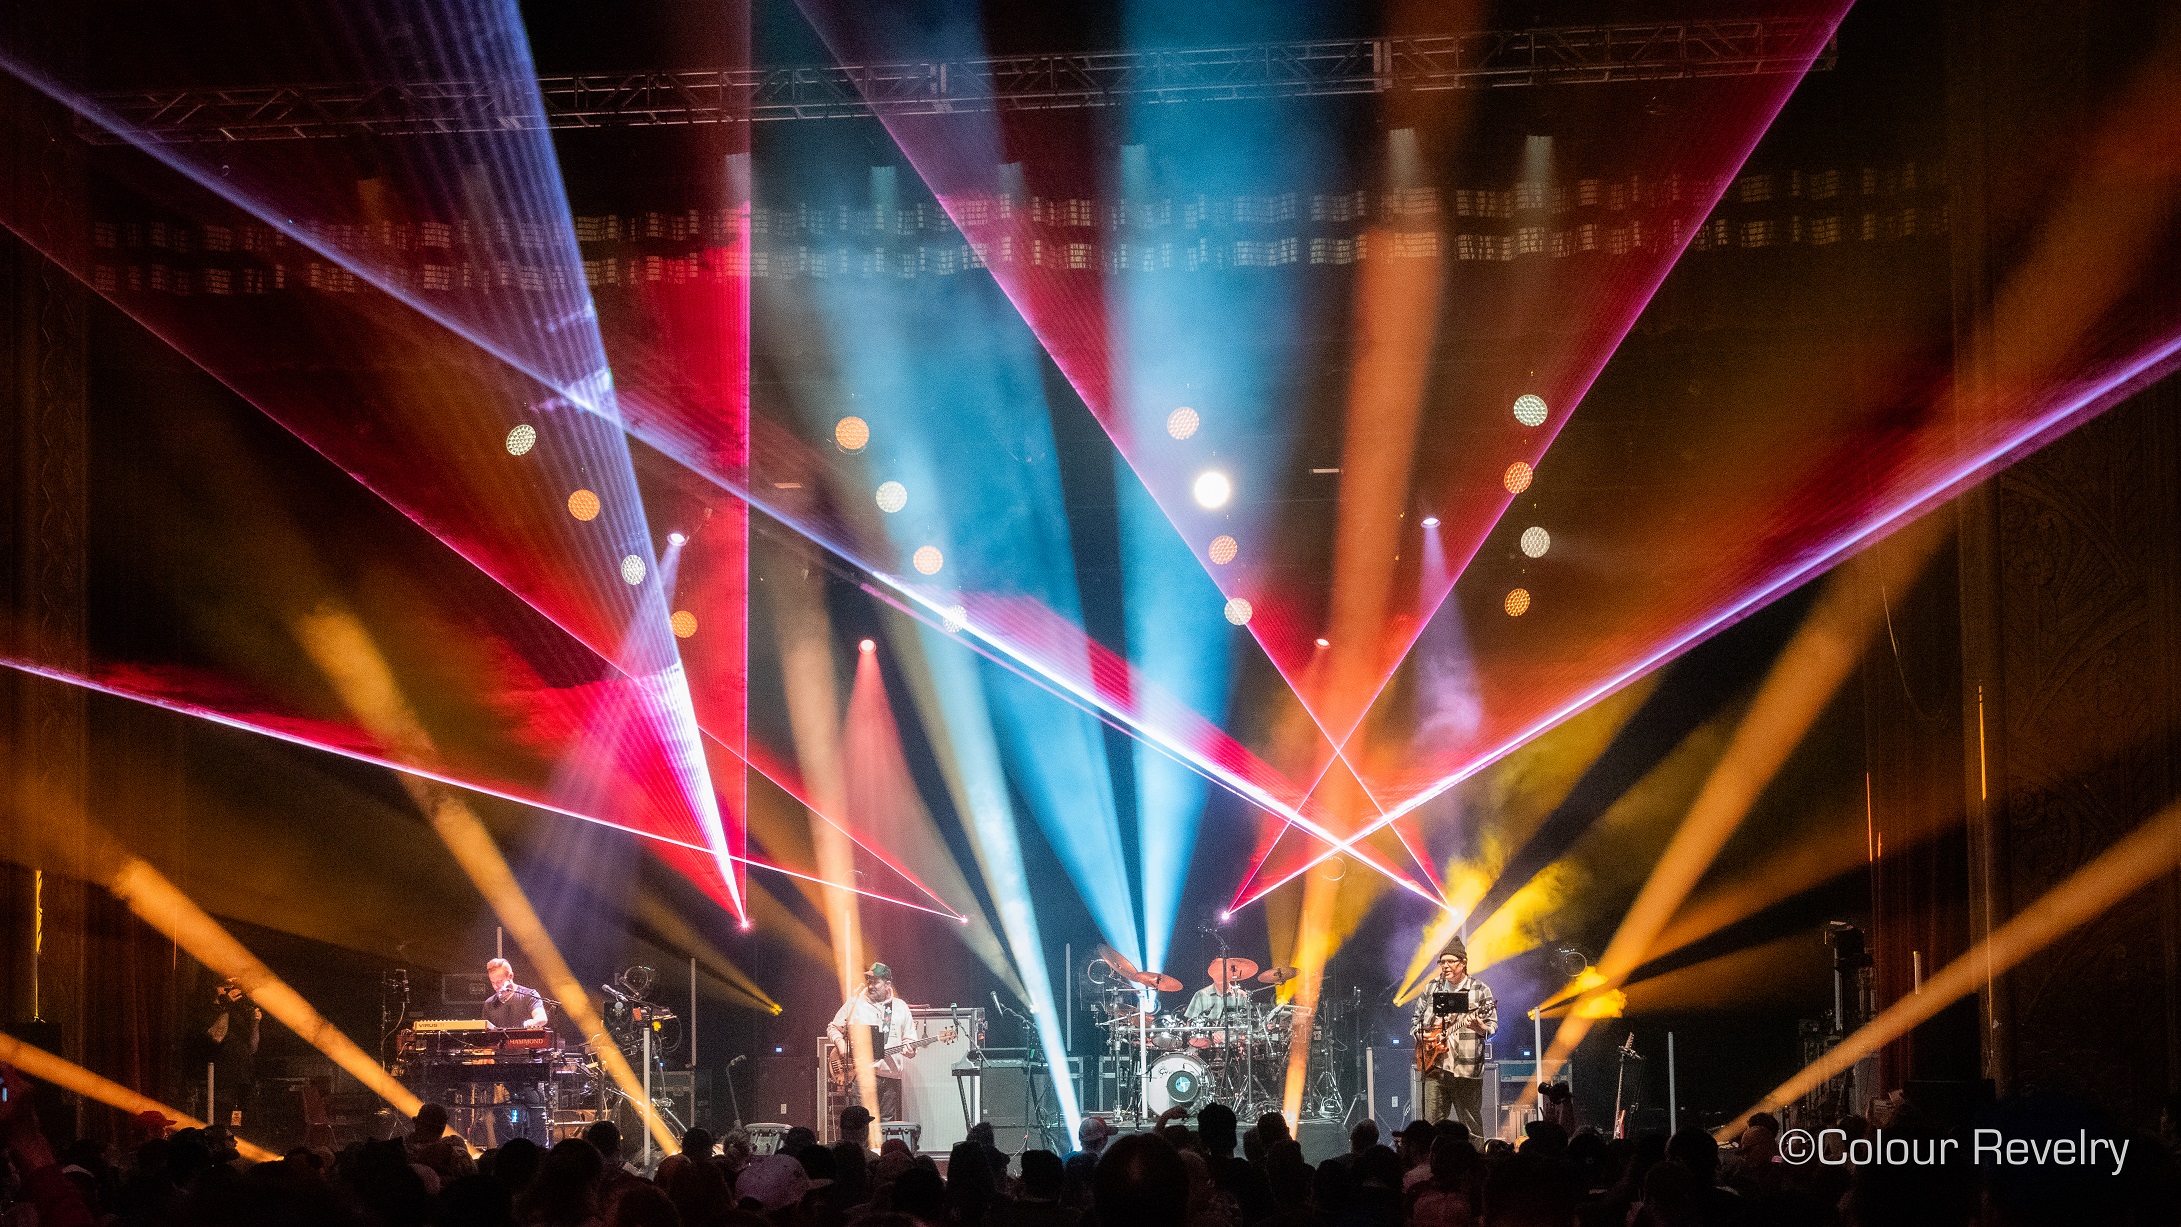 Why We Dance – The Disco Biscuits Invade Wilkes-Barre